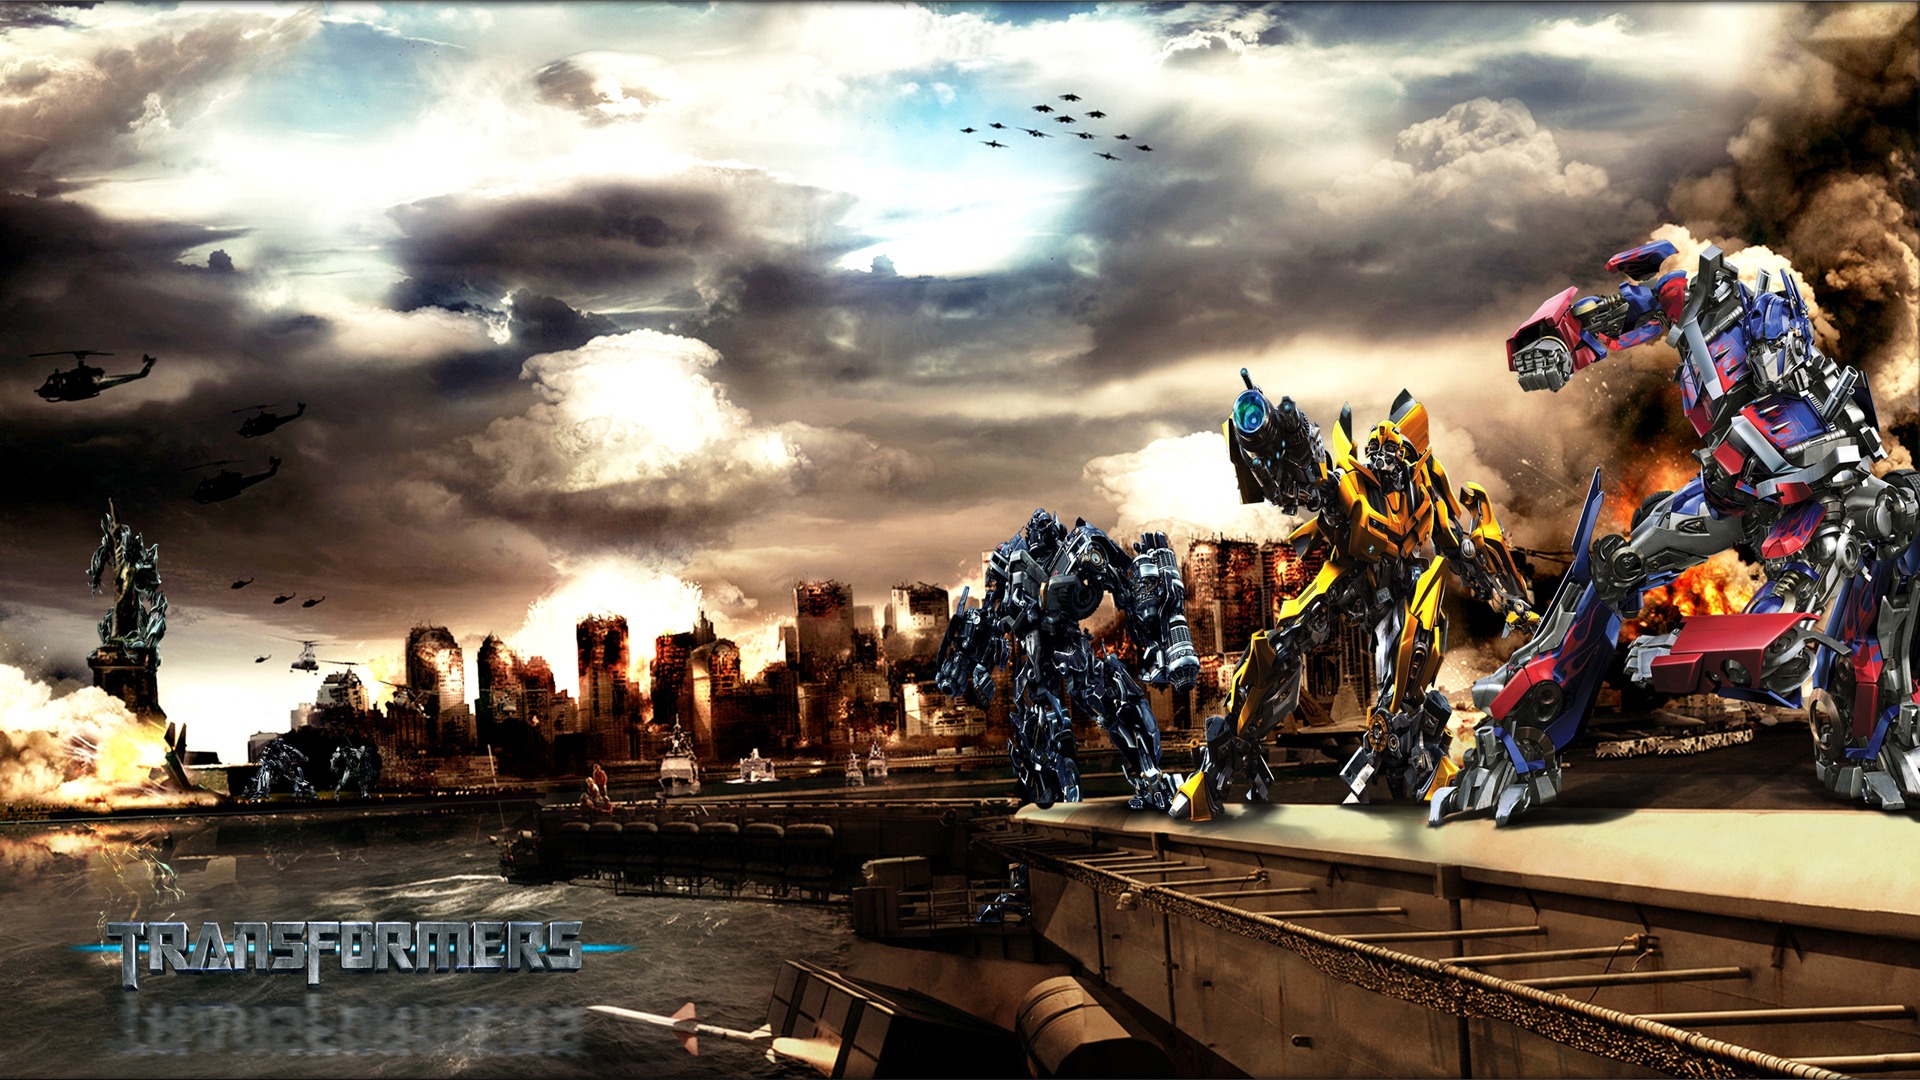 Full HD Wallpaper Of Transformers Image Amp Pictures Becuo